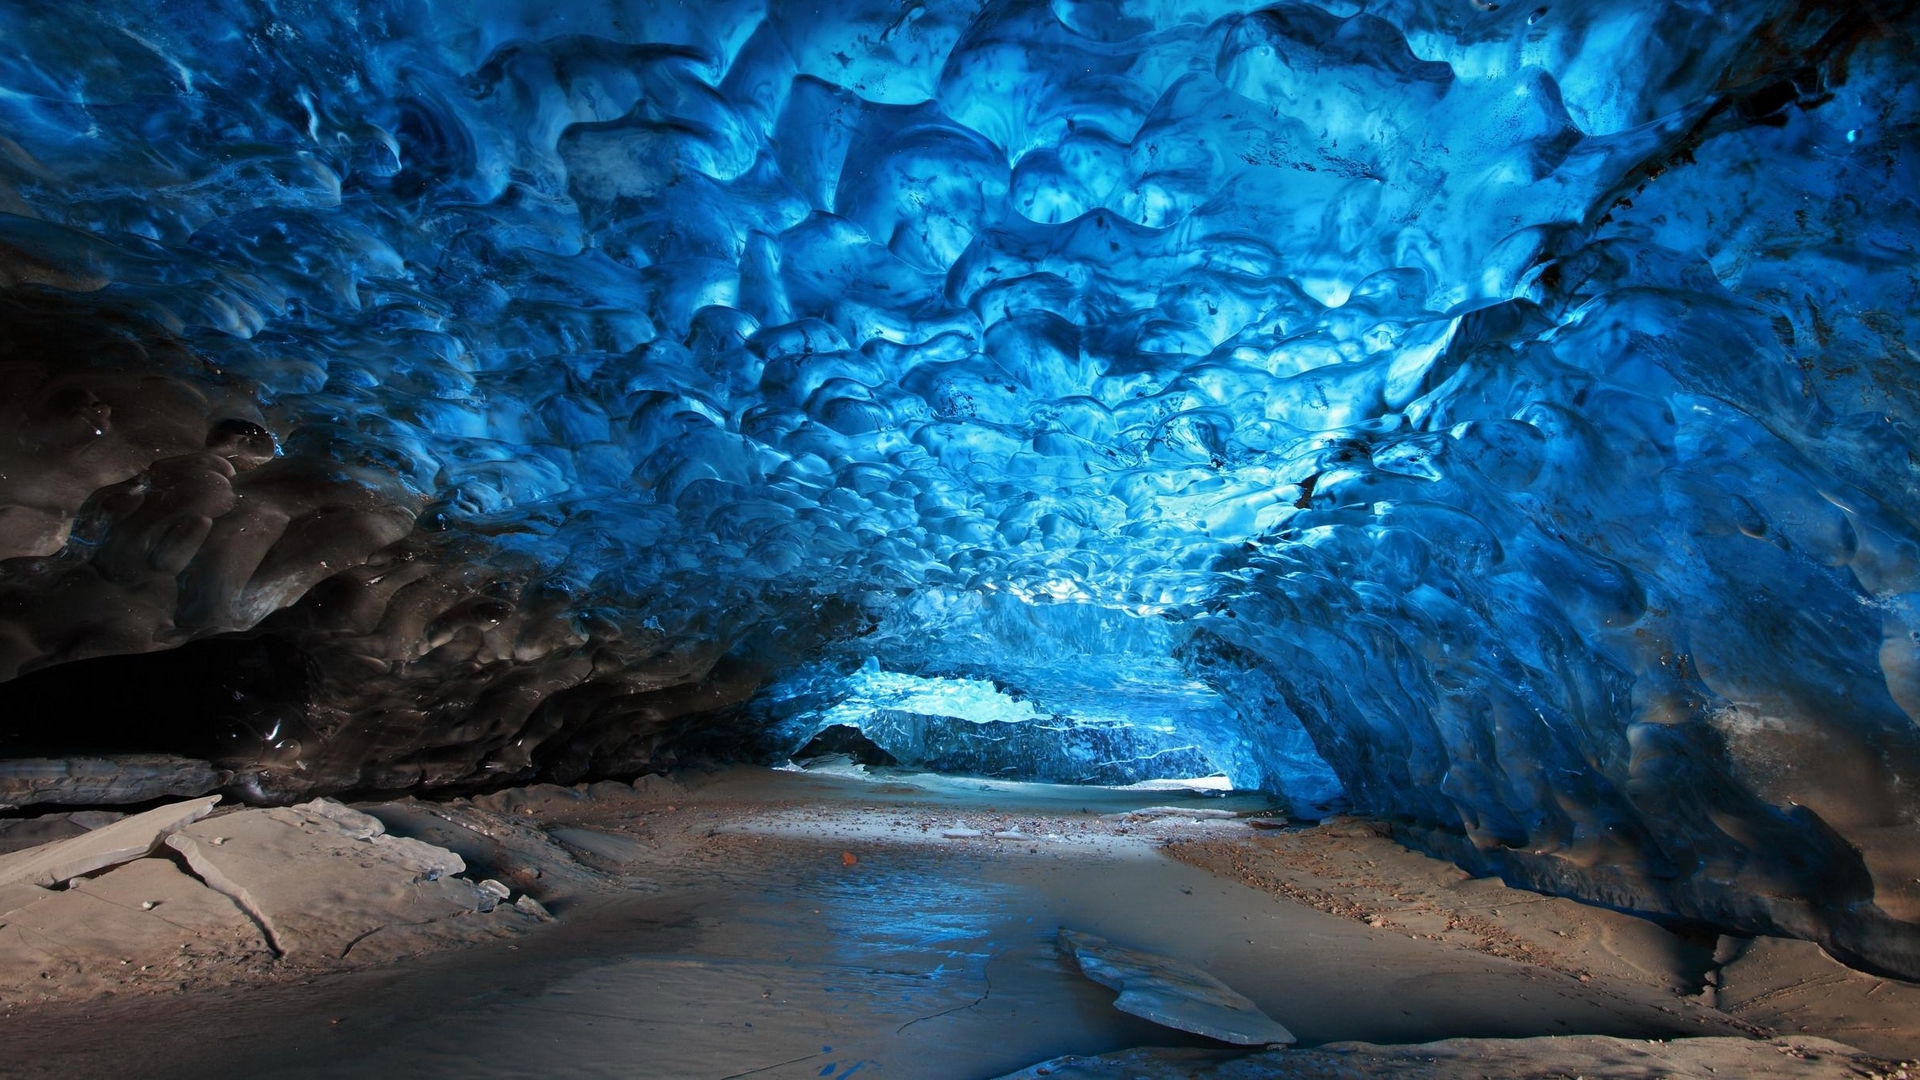 Blue Ice Cave Wallpaper Photography 9951 Wallpaper High Resolution